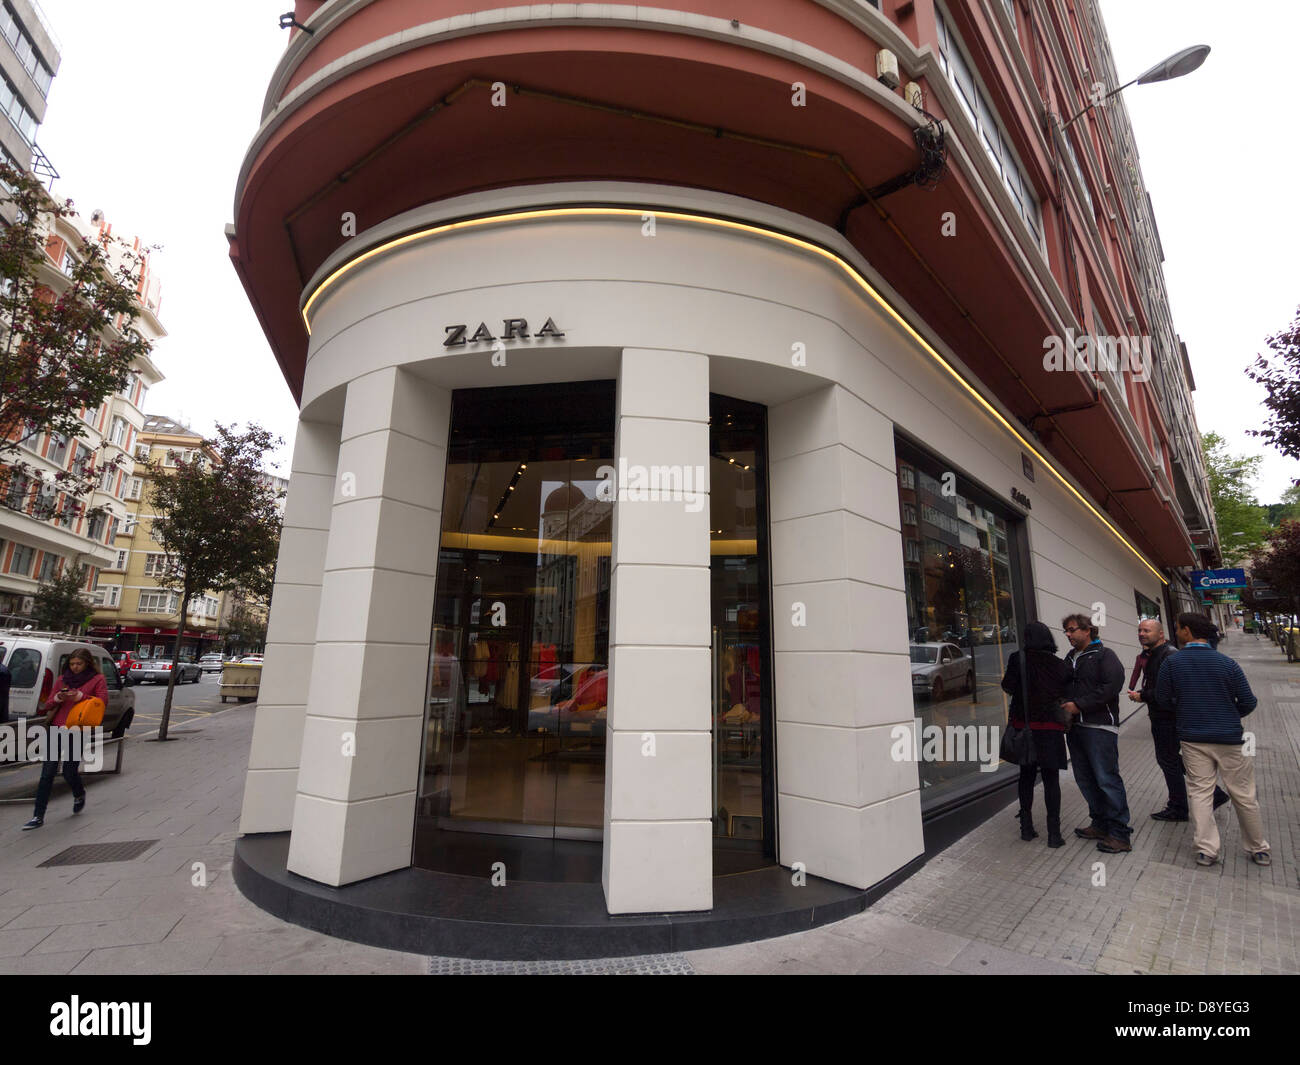 Building where the first Zara store in the world was opened in 1975, in La Coruna, Galicia, Spain, Europe Stock Photo